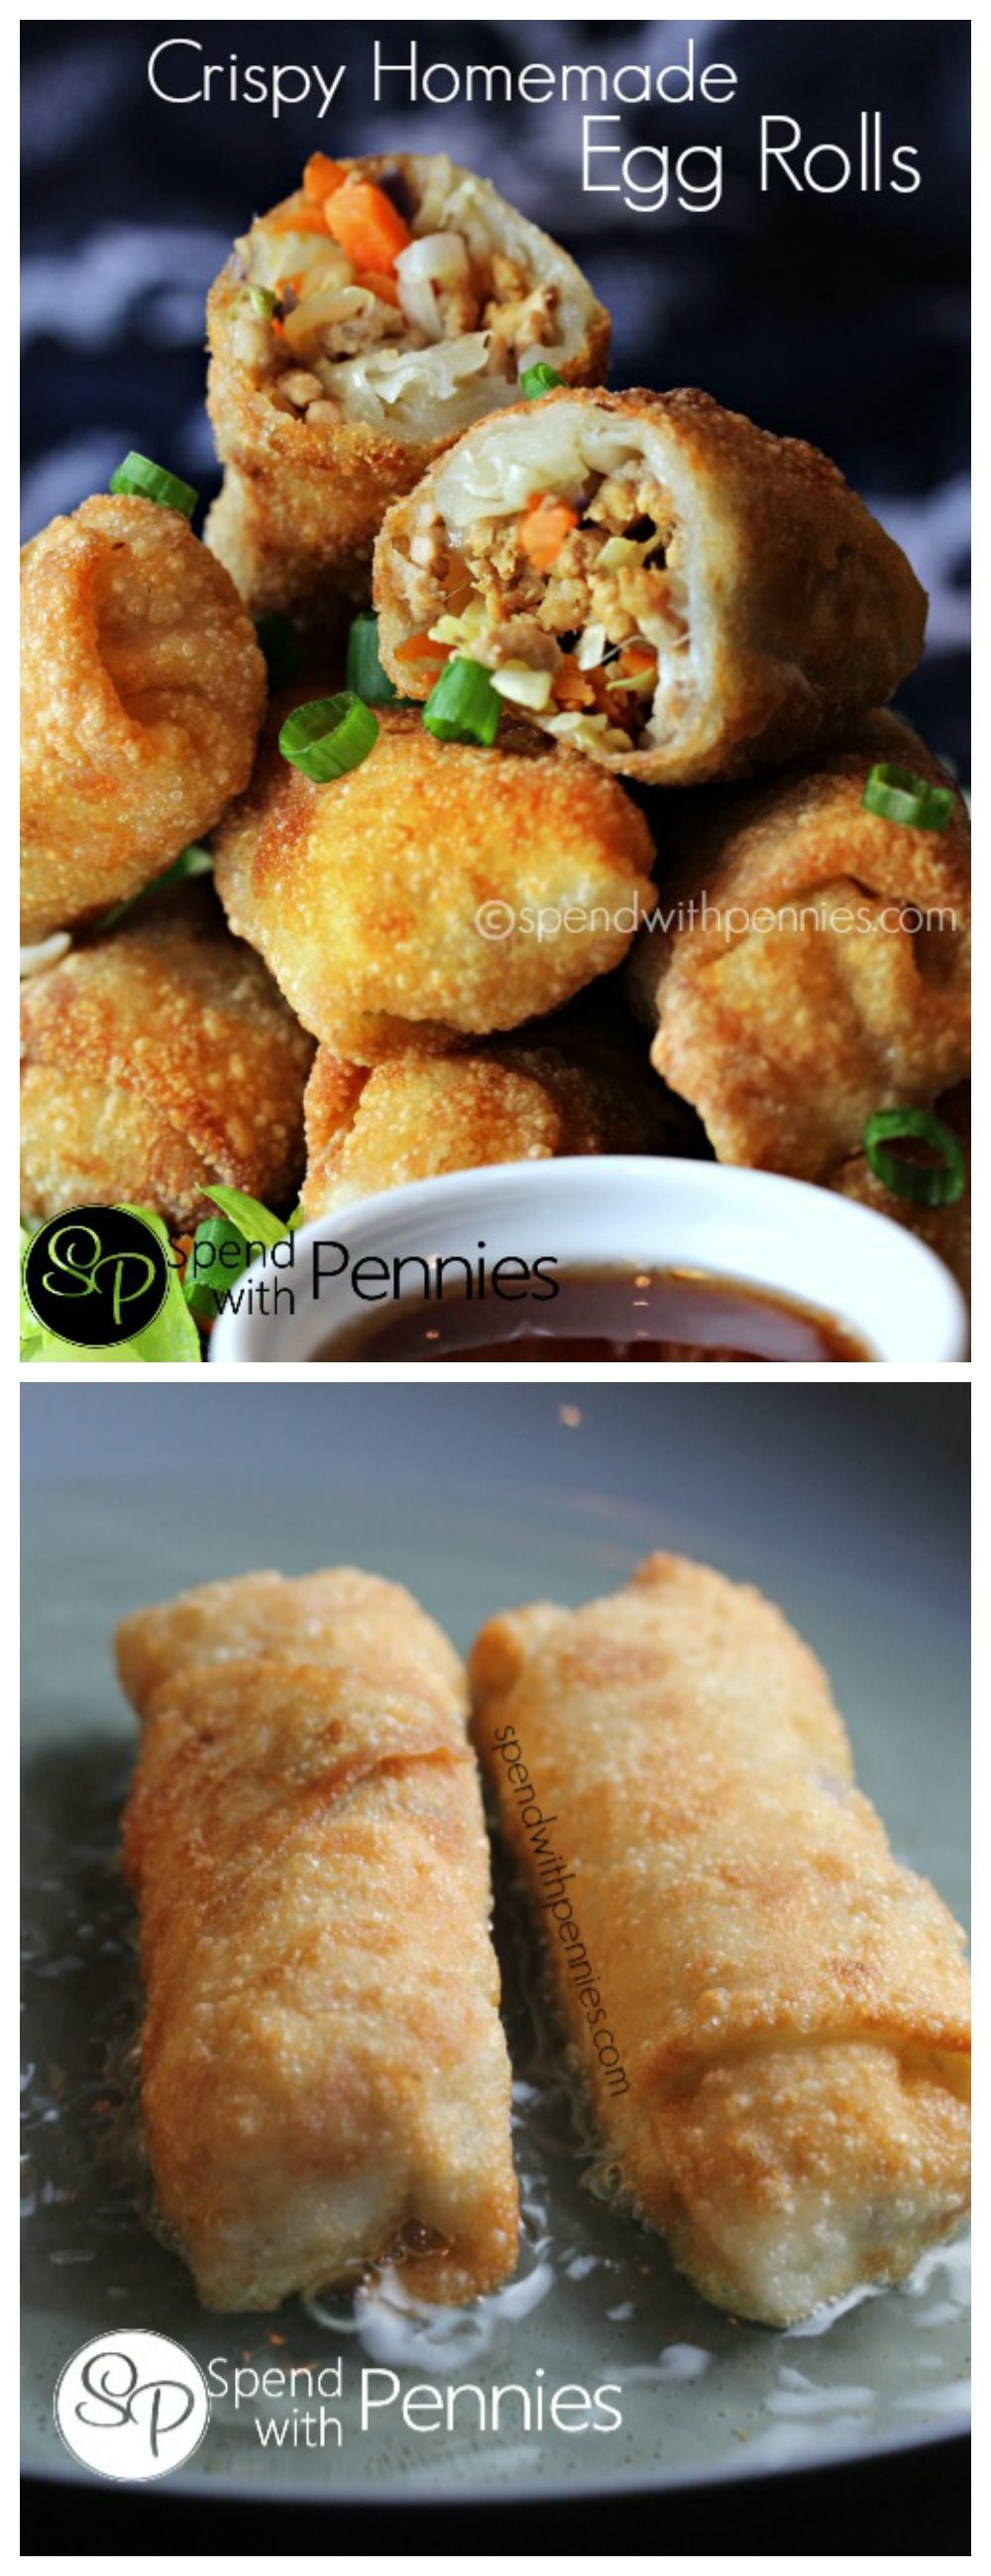 Crispy Homemade Egg Roll recipe! This recipe is easy to make and homemade Egg Rolls taste amazing!  (Can be baked or fried)! -   24 chinese recipes easy
 ideas